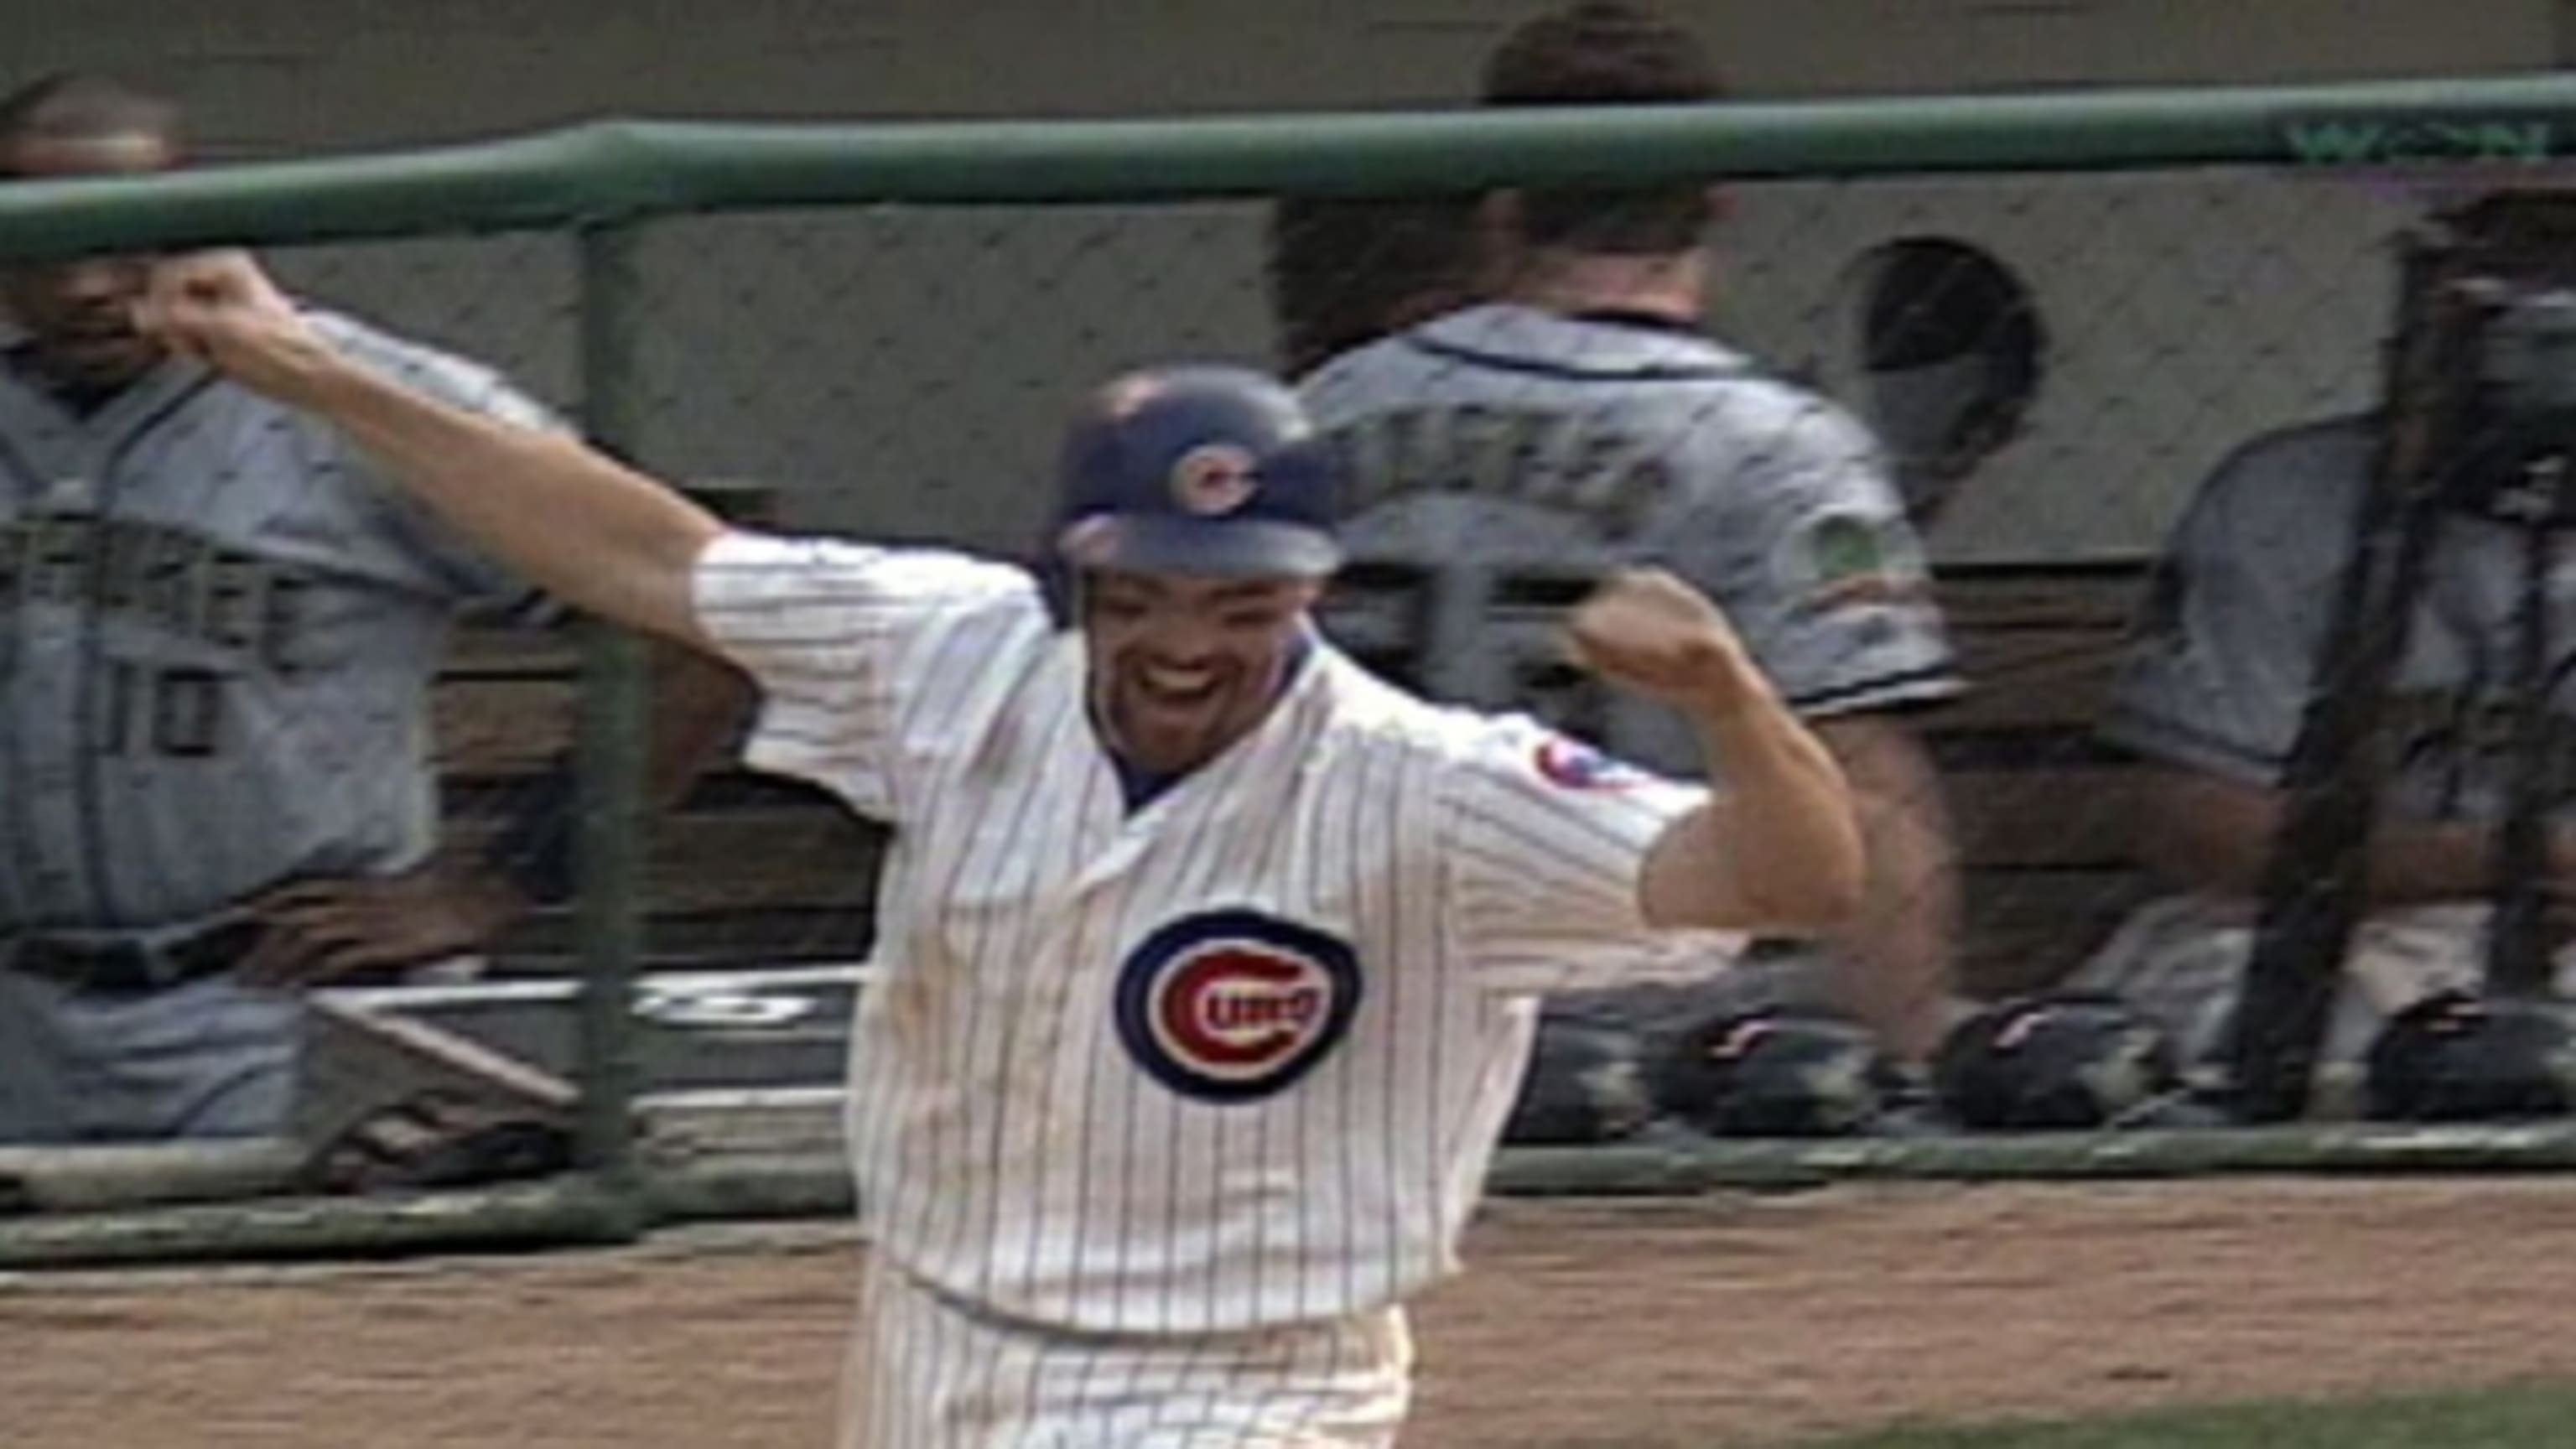 The newest inductees to the Cubs HOF: Mark Grace and Shawon Dunston 